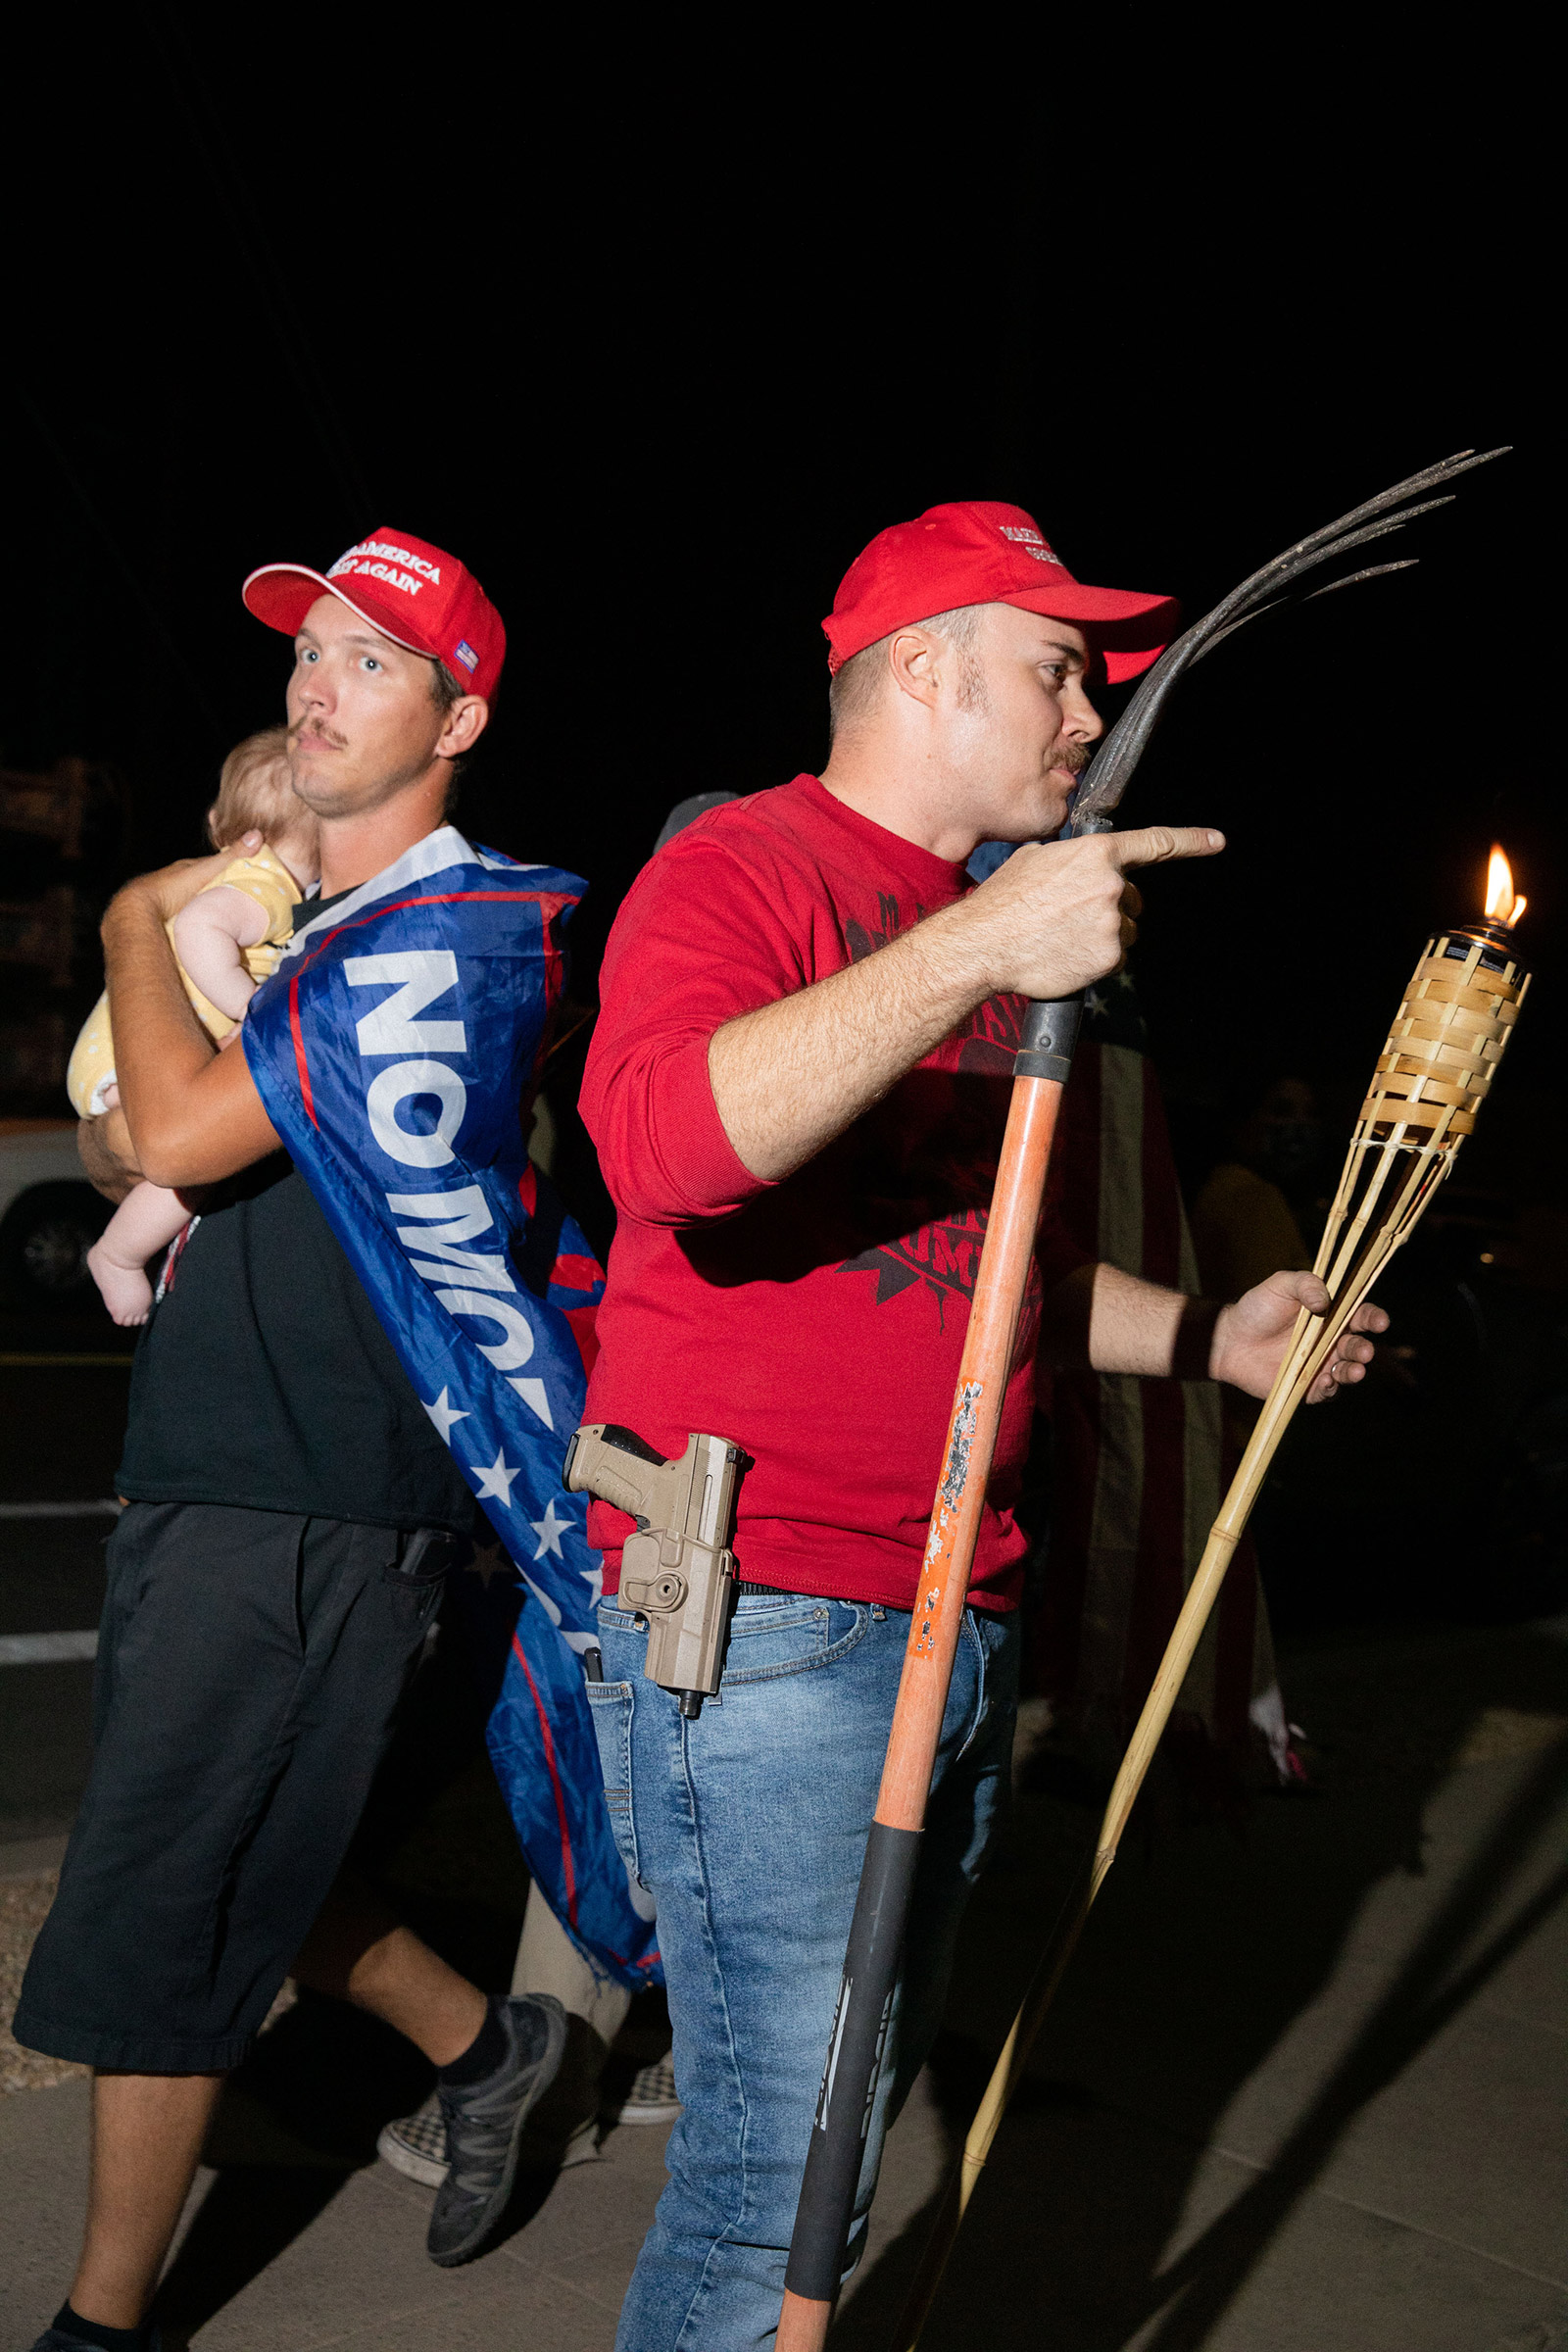 A father with child walks by a man with a rake, gun and tiki torch at the Maricopa County Elections Office in Phoenix, AZ on November 5, 2020